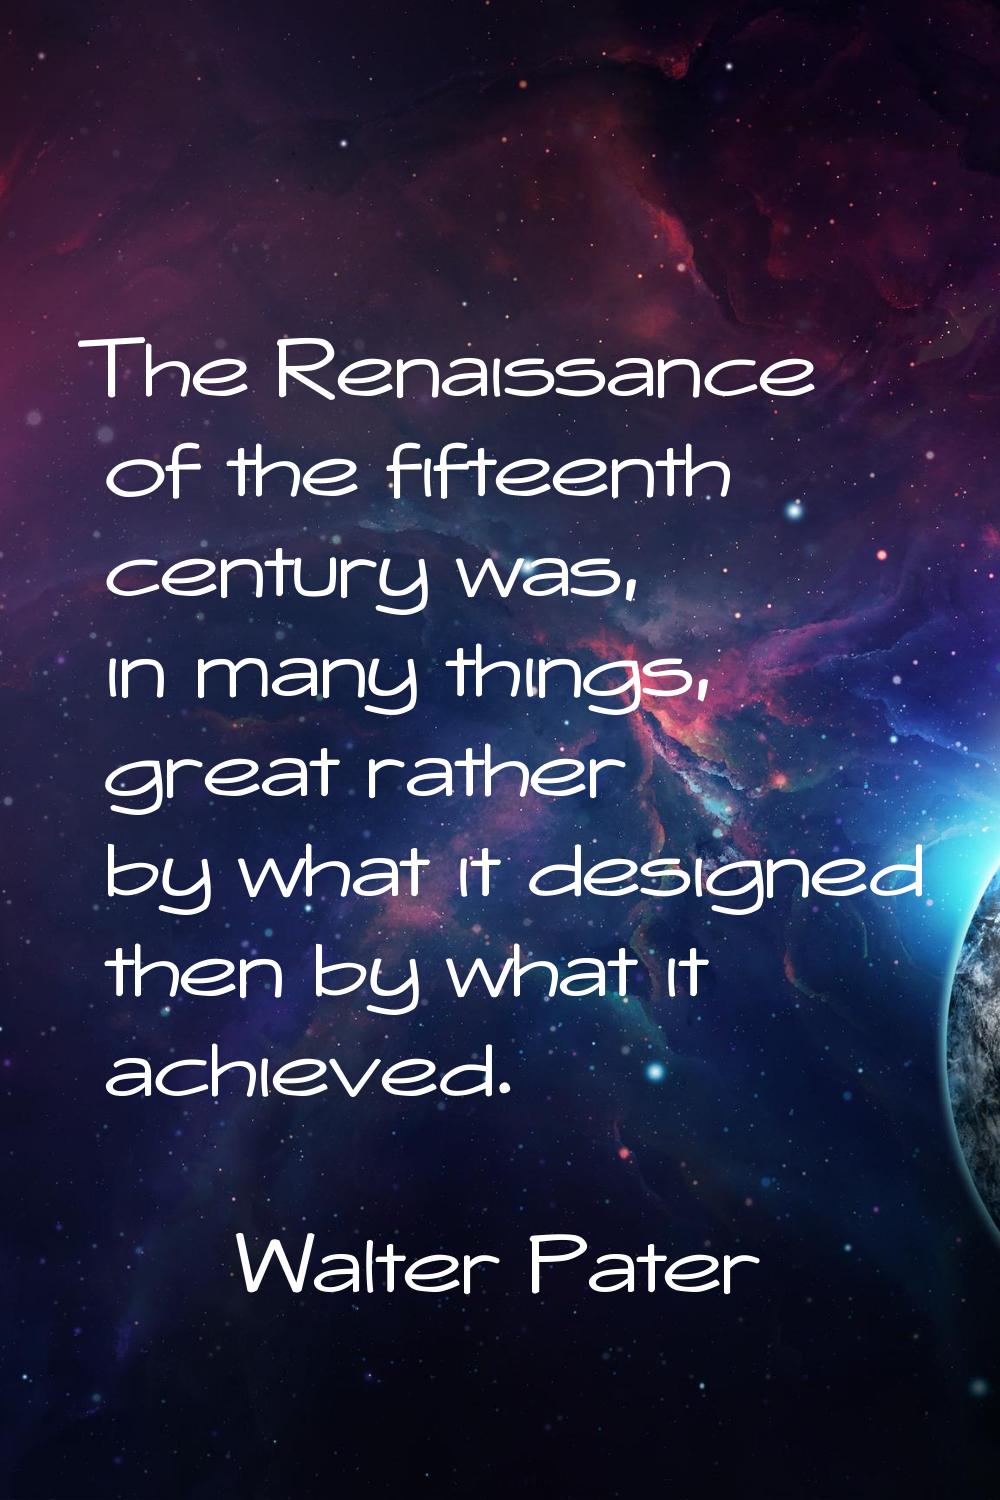 The Renaissance of the fifteenth century was, in many things, great rather by what it designed then